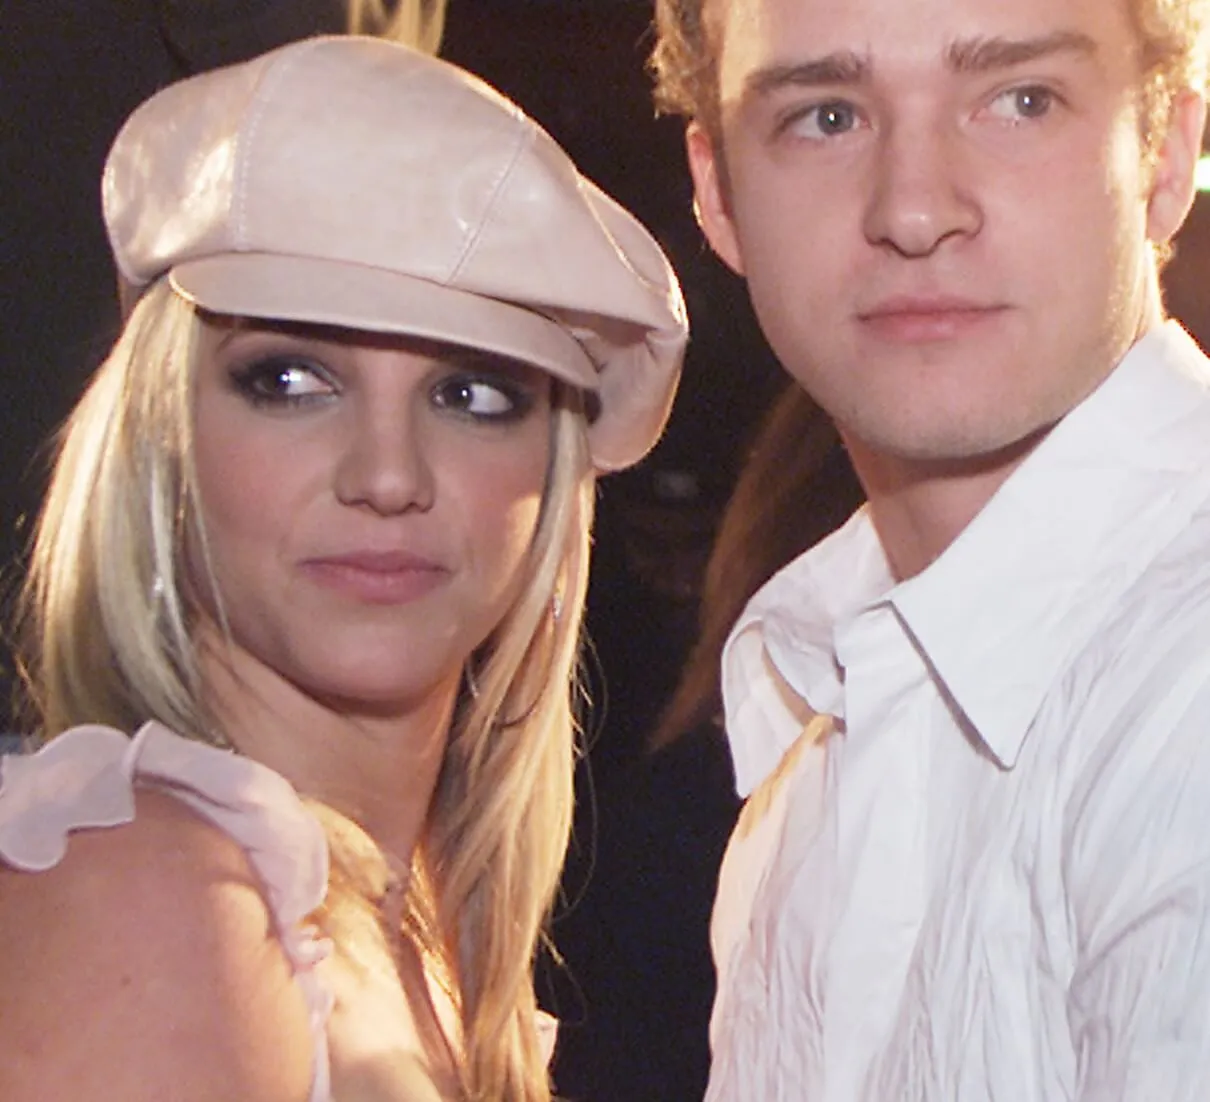 Britney Spears and Justin Timberlake wearing white